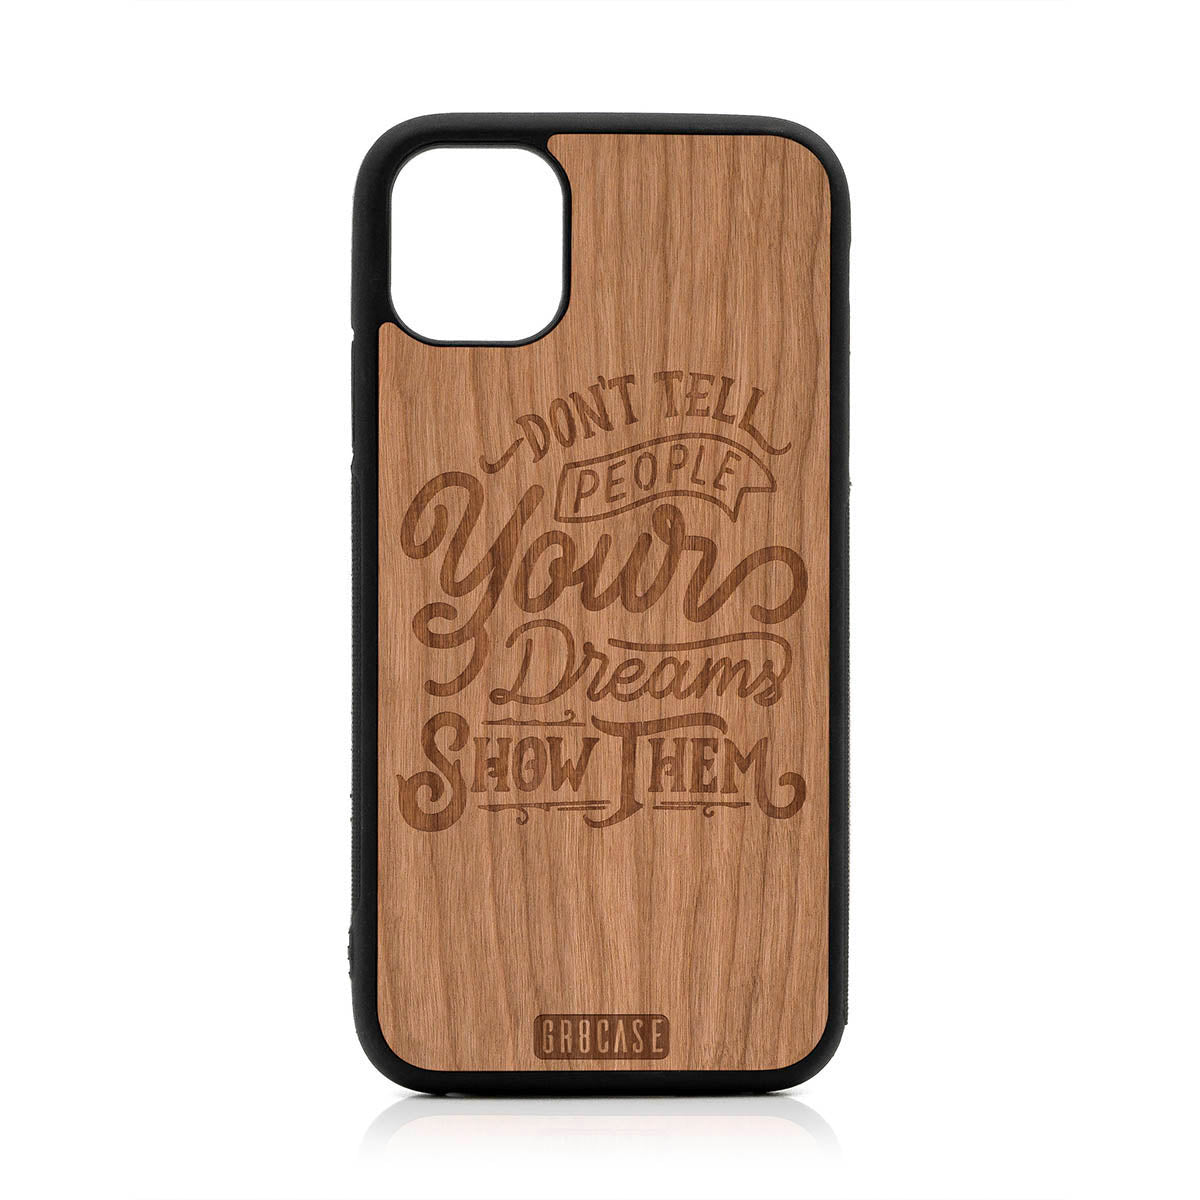 Don't Tell People Your Dreams Show Them Design Wood Case For iPhone 11 by GR8CASE